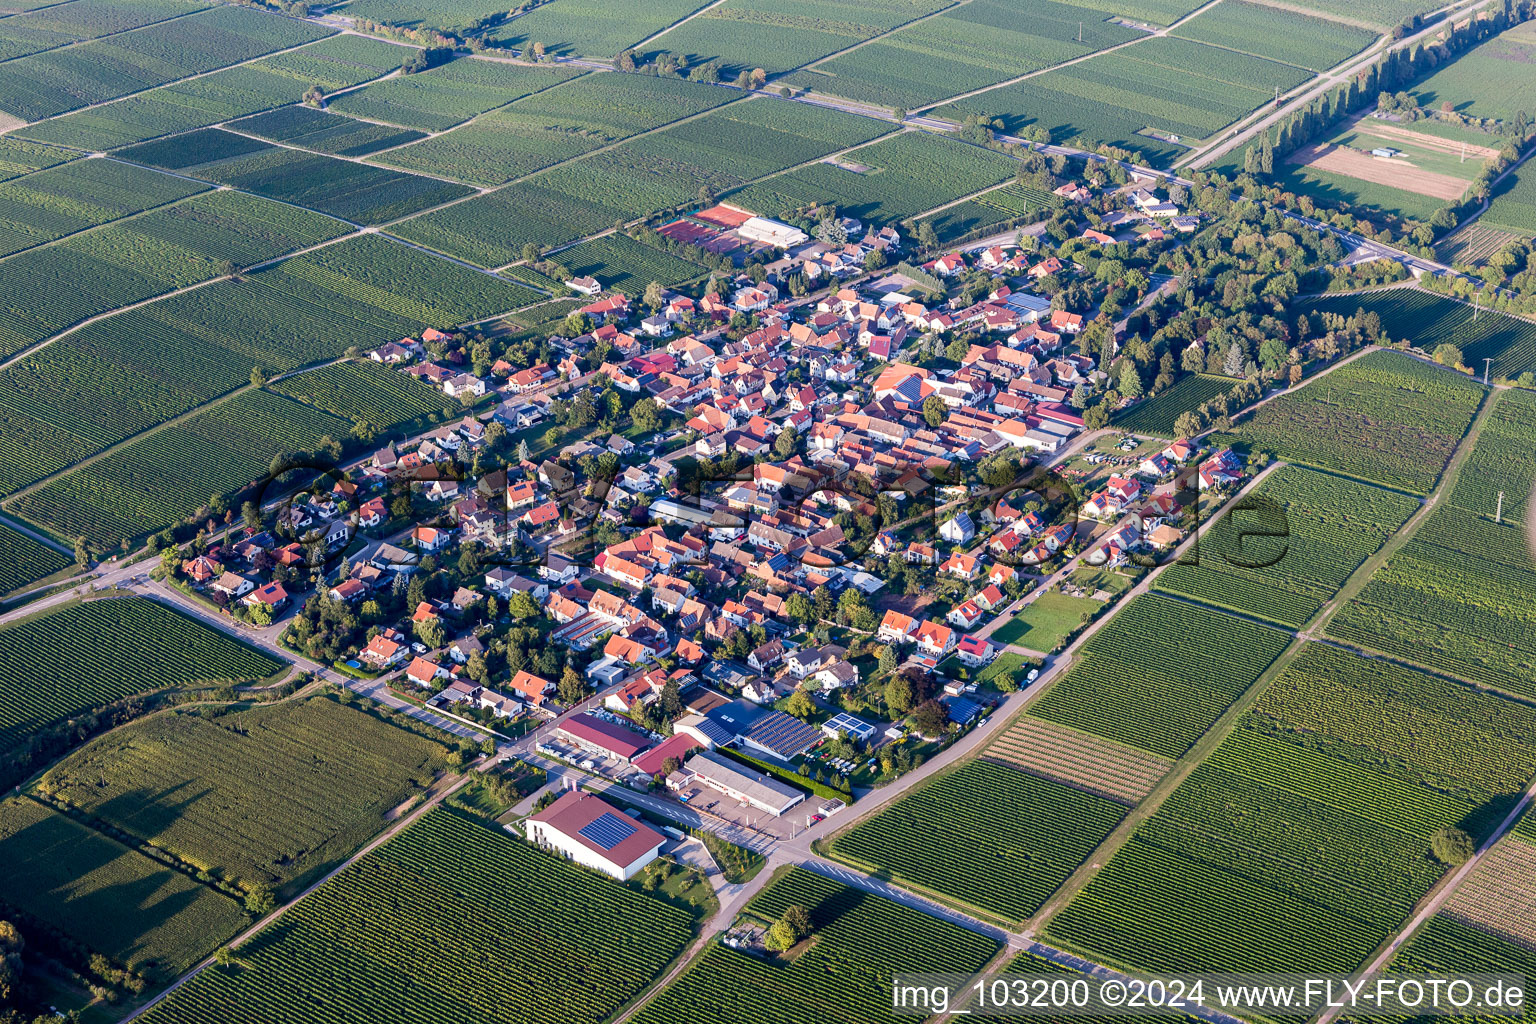 Aerial view of Village - view on the edge of agricultural fields and farmland in Walsheim in the state Rhineland-Palatinate, Germany